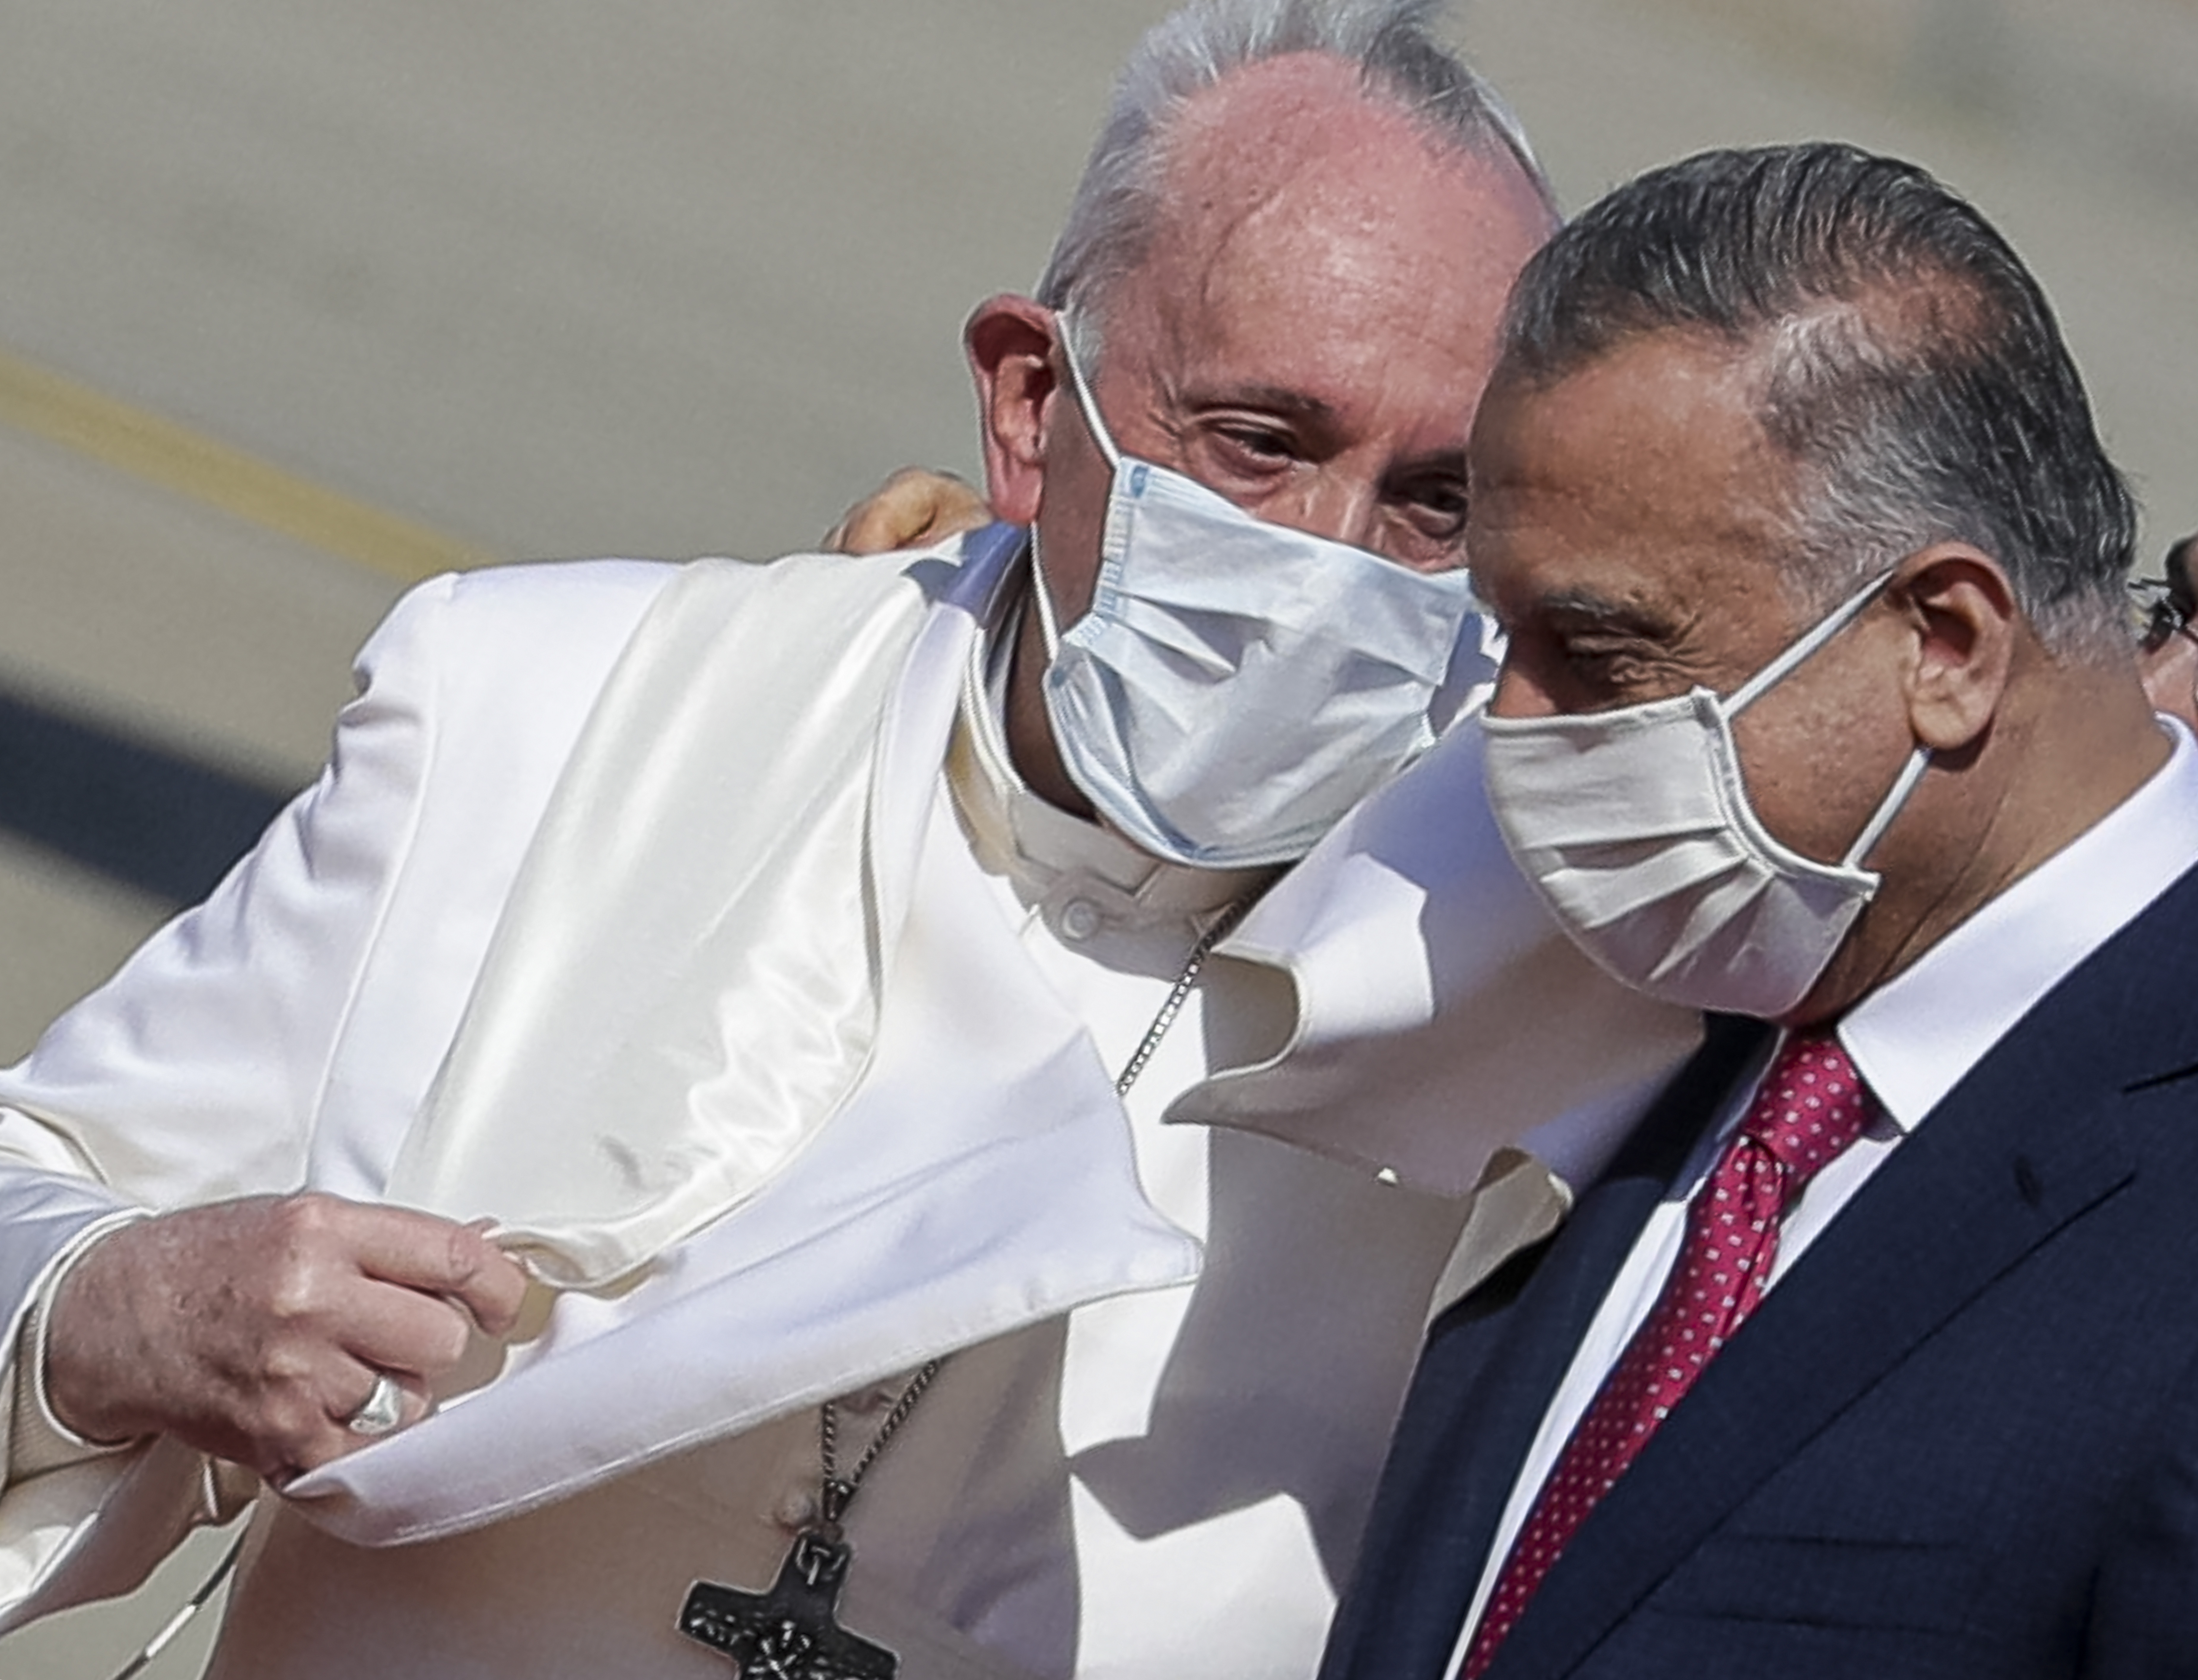 Pope Francis is greeted by Iraqi Prime Minister Mustafa al-Kadhimi as he arrives at Baghdad's international airport, Iraq, on March 5, 2021. (AP Photo/Andrew Medichini)